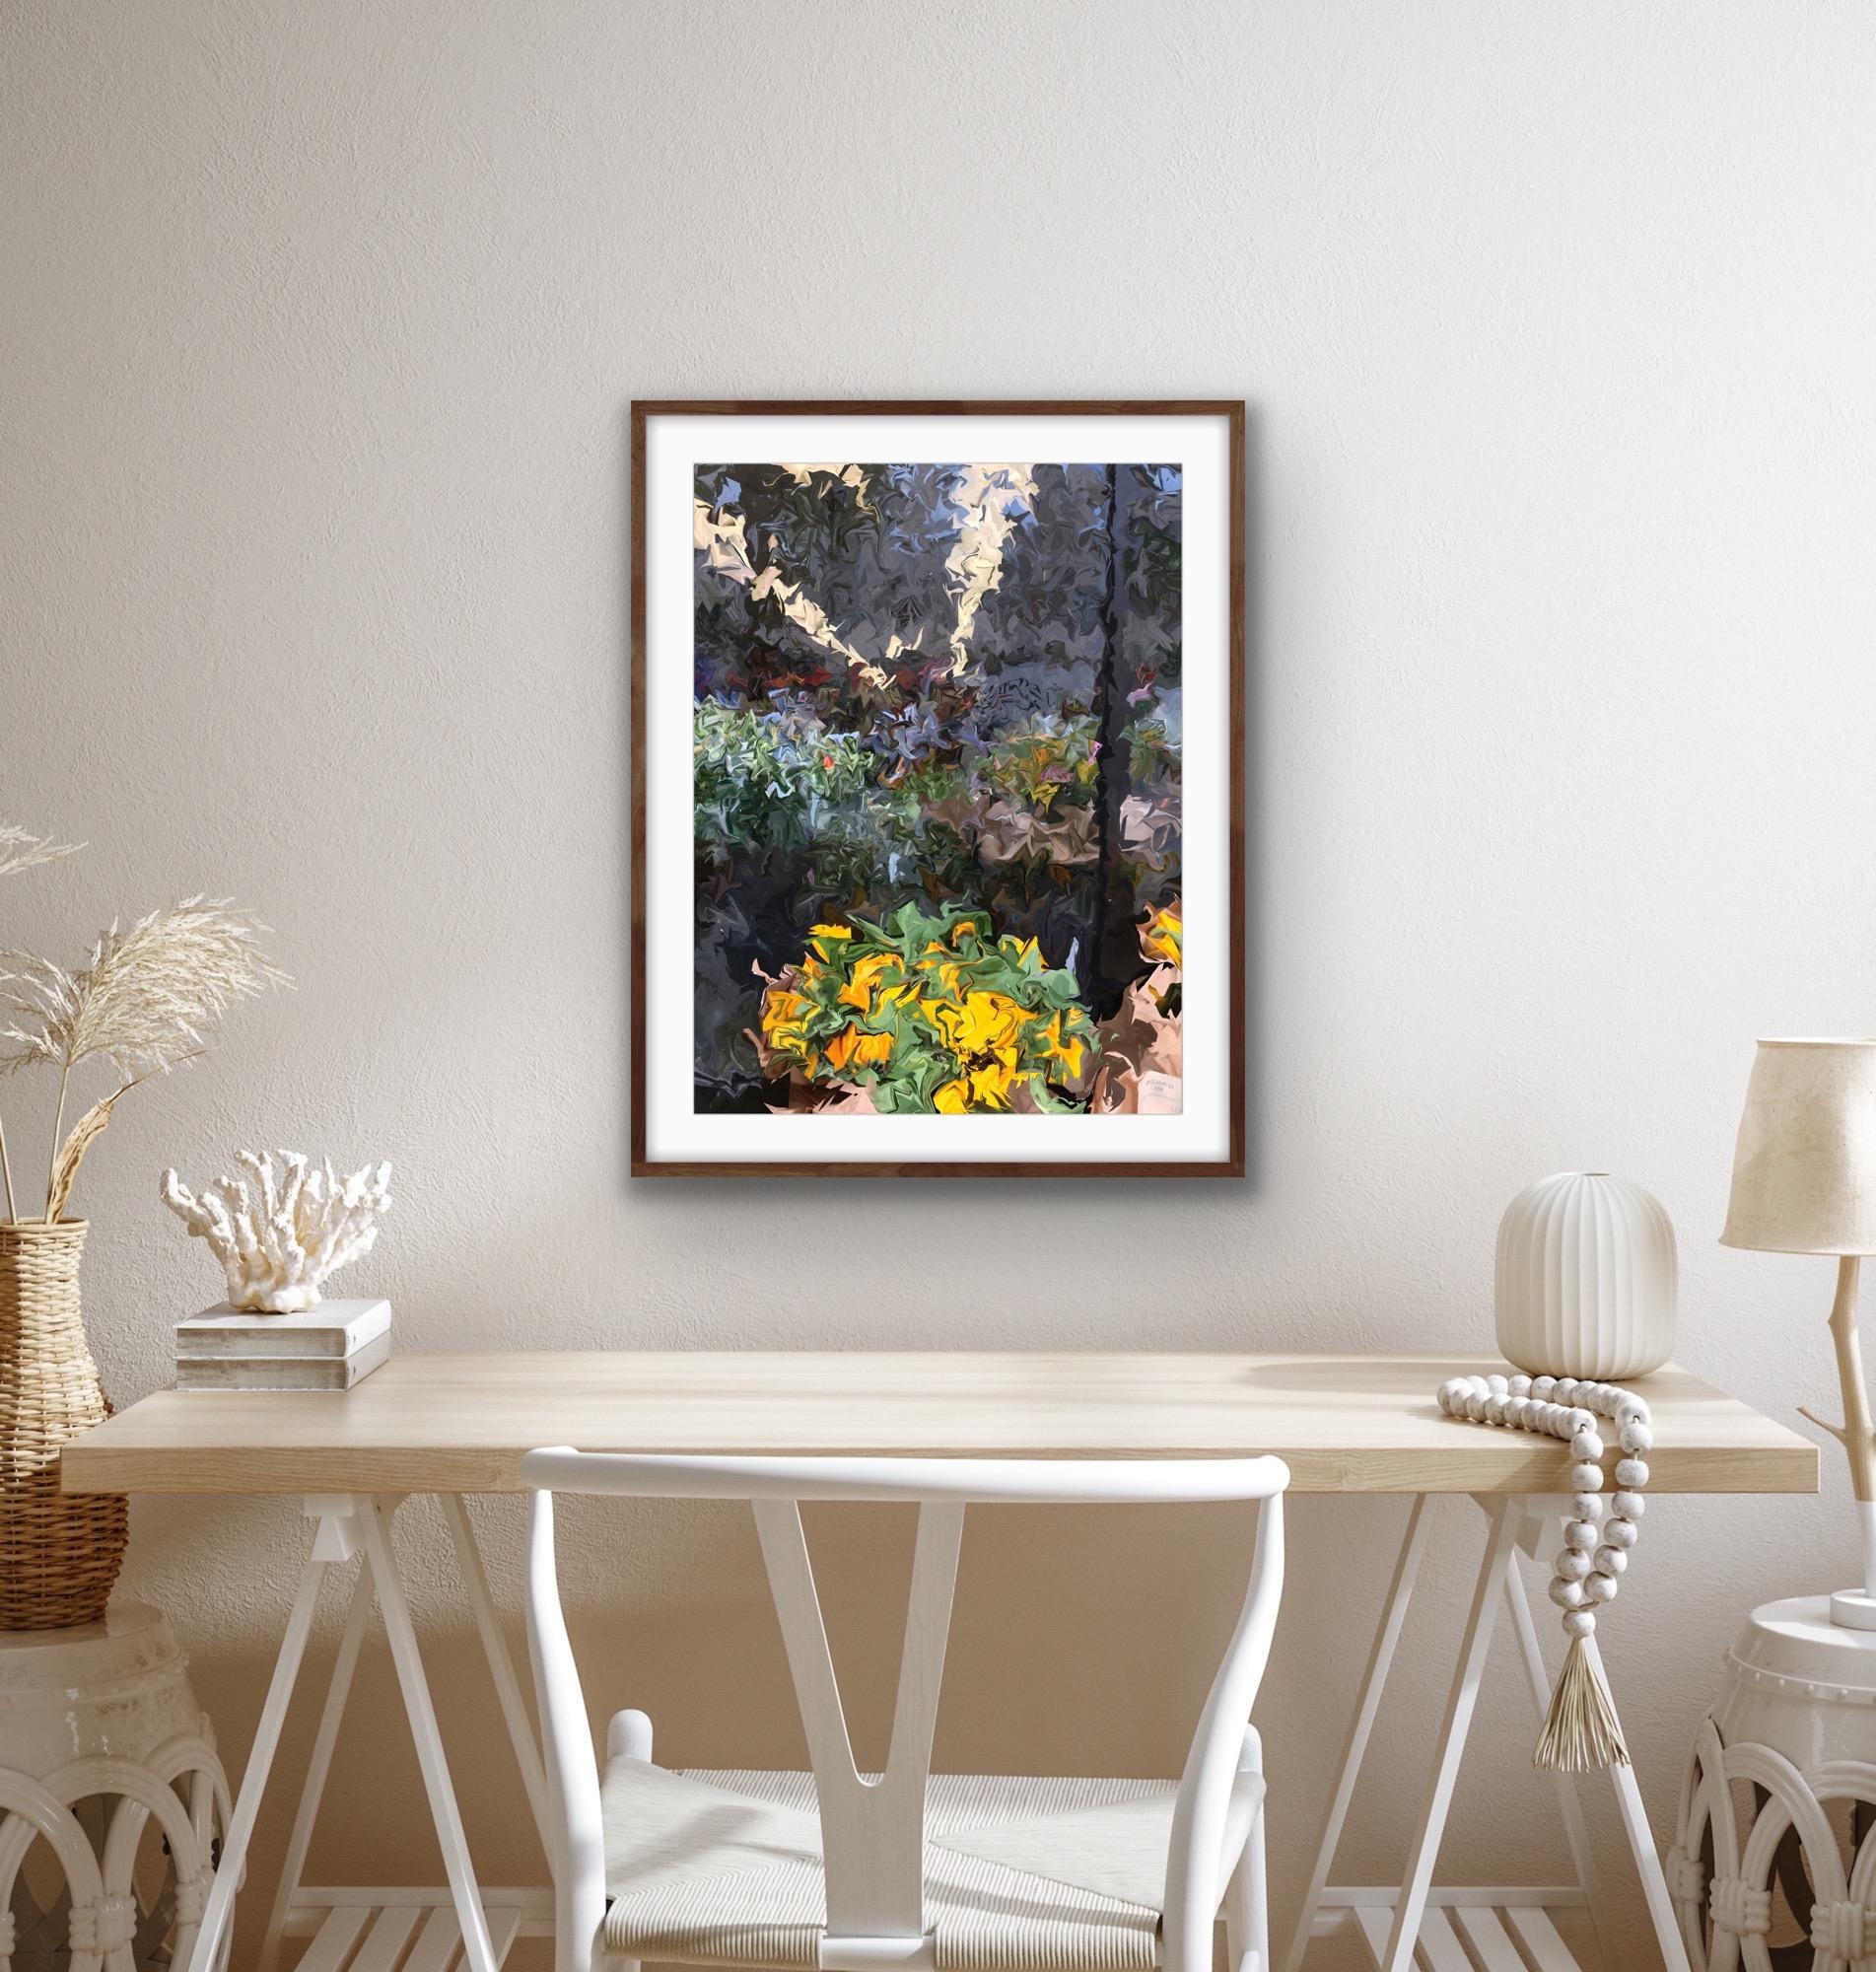 Sunflowers, 2018, digitally manipulated photograph, signed - Black Abstract Print by Gary Cruz